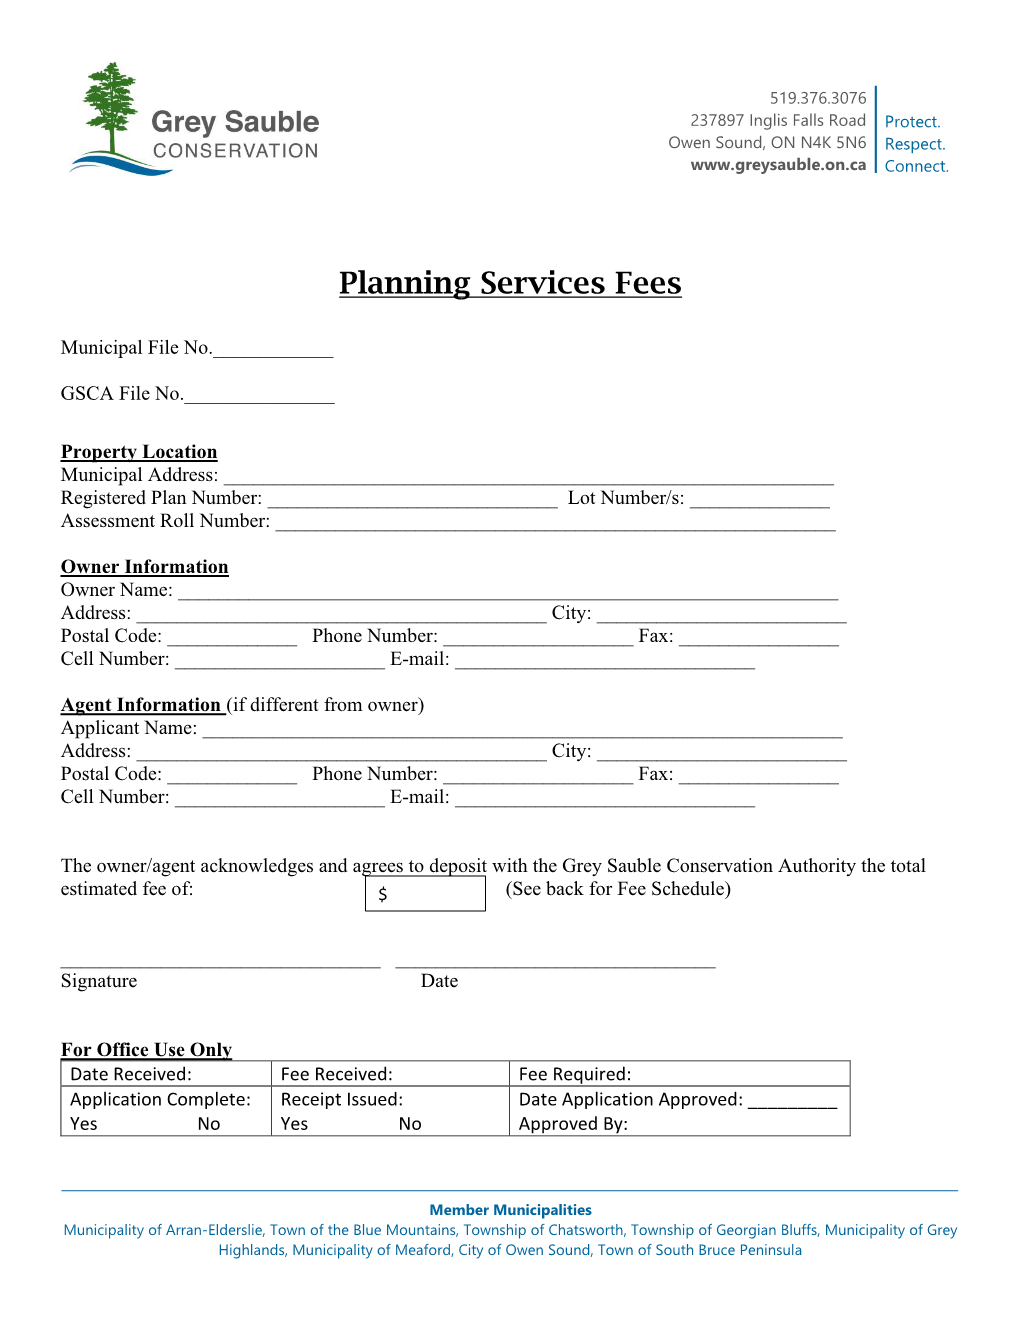 Planning Services Fees